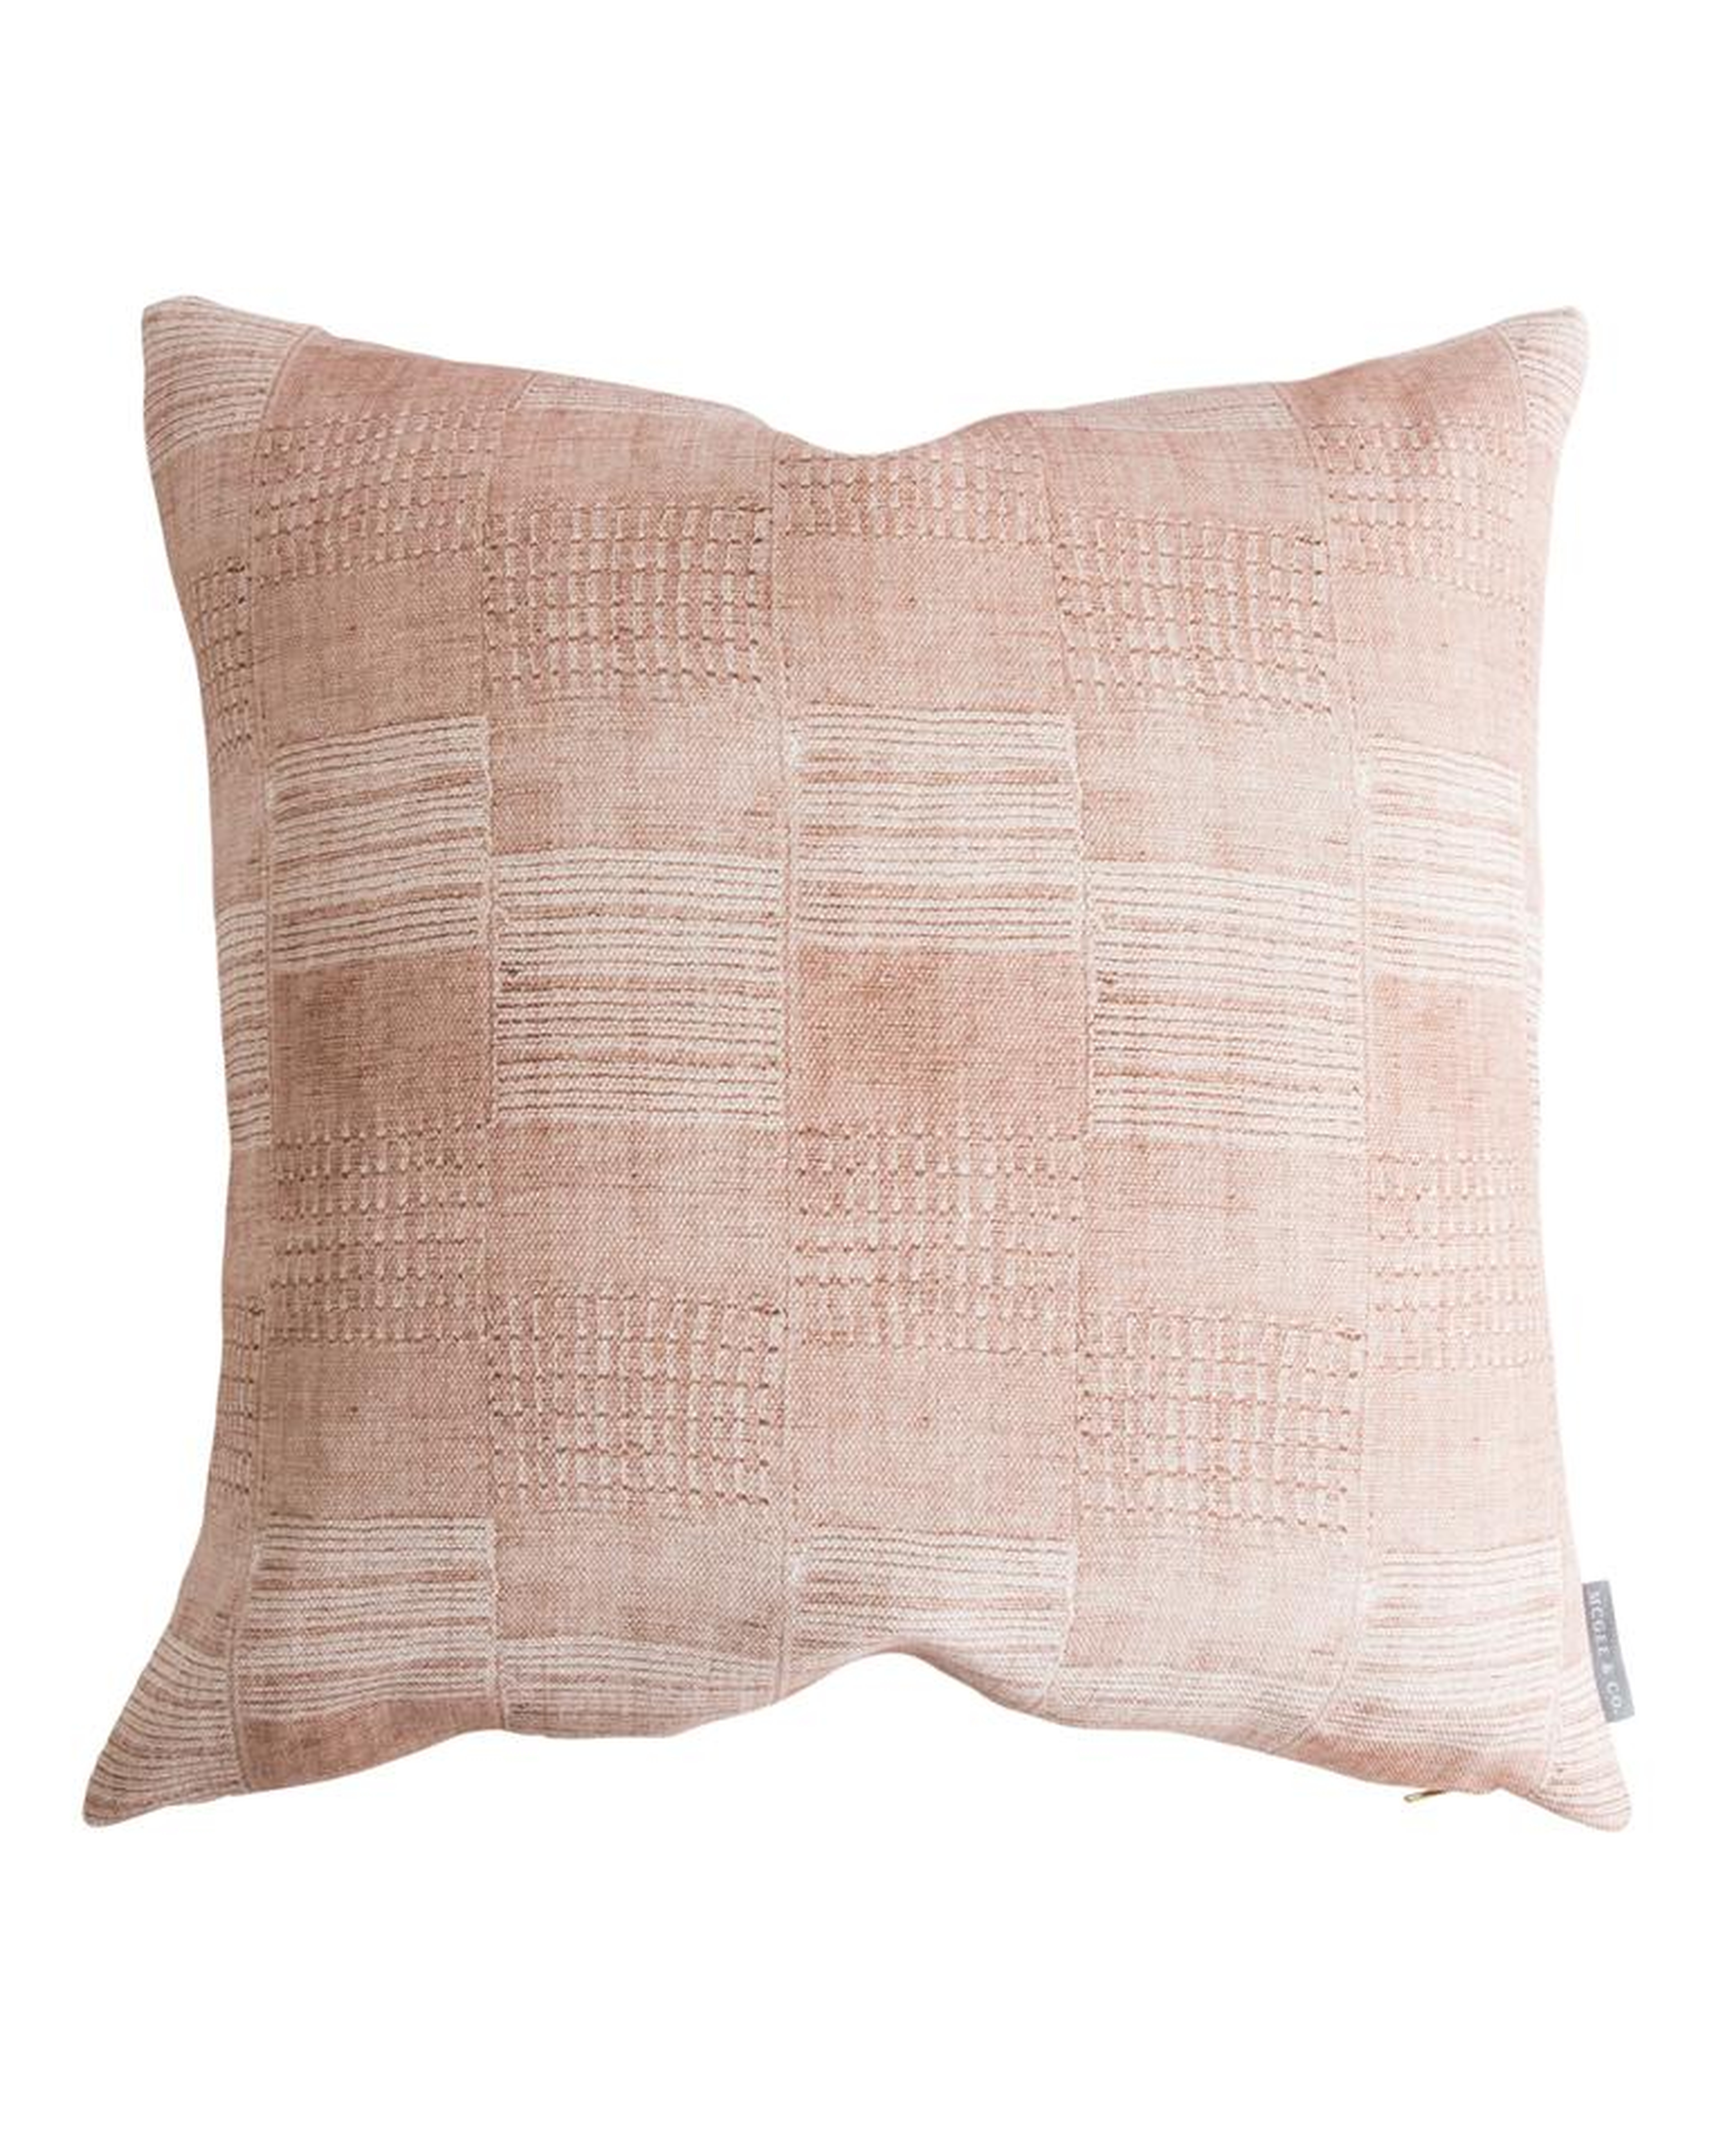 RUBY PILLOW COVER - McGee & Co.